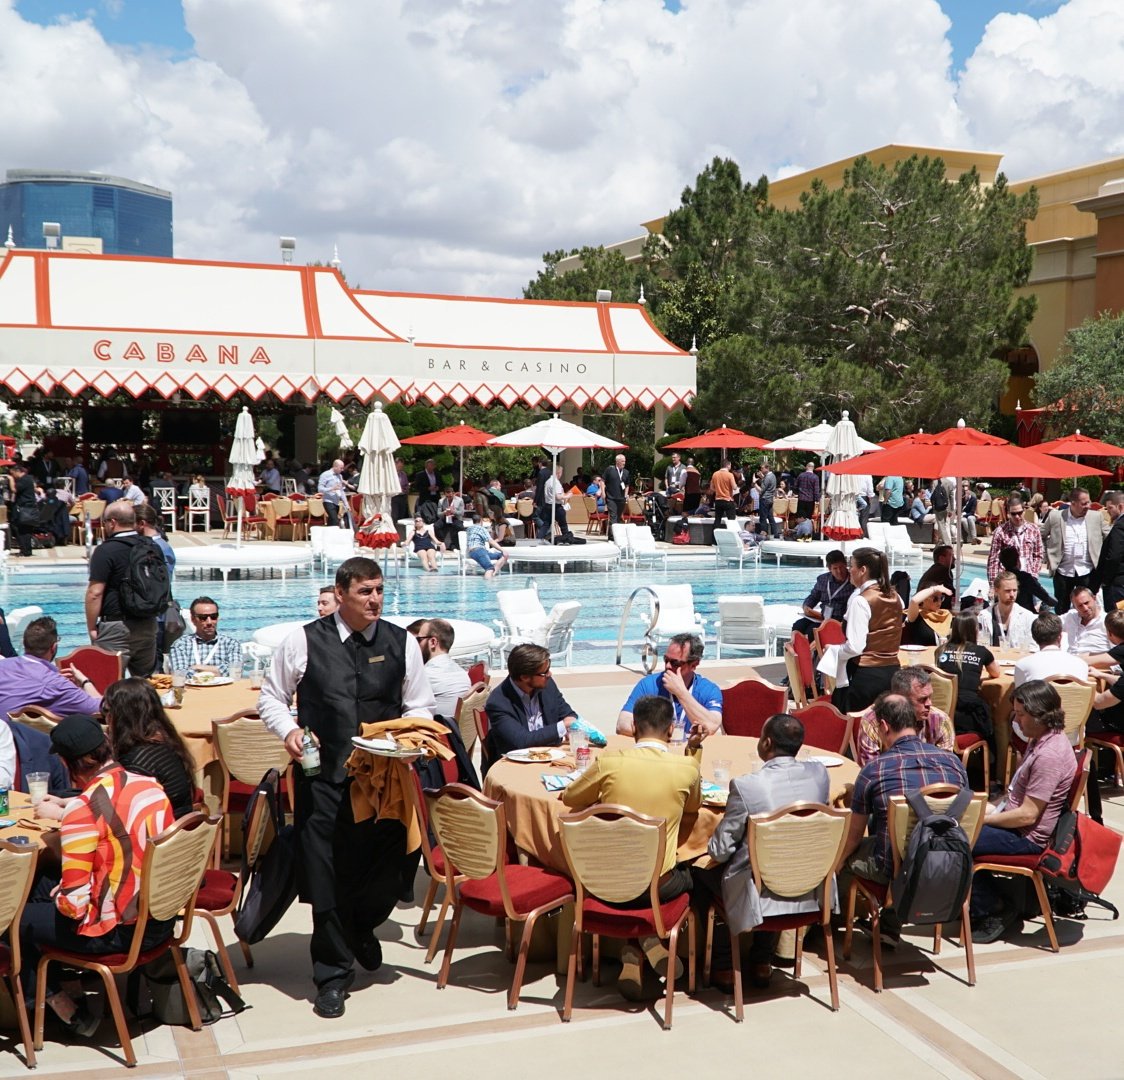 wejobes: It was a lovely lunch by the pool at #MagentoImagine https://t.co/7DdxCHoXJq